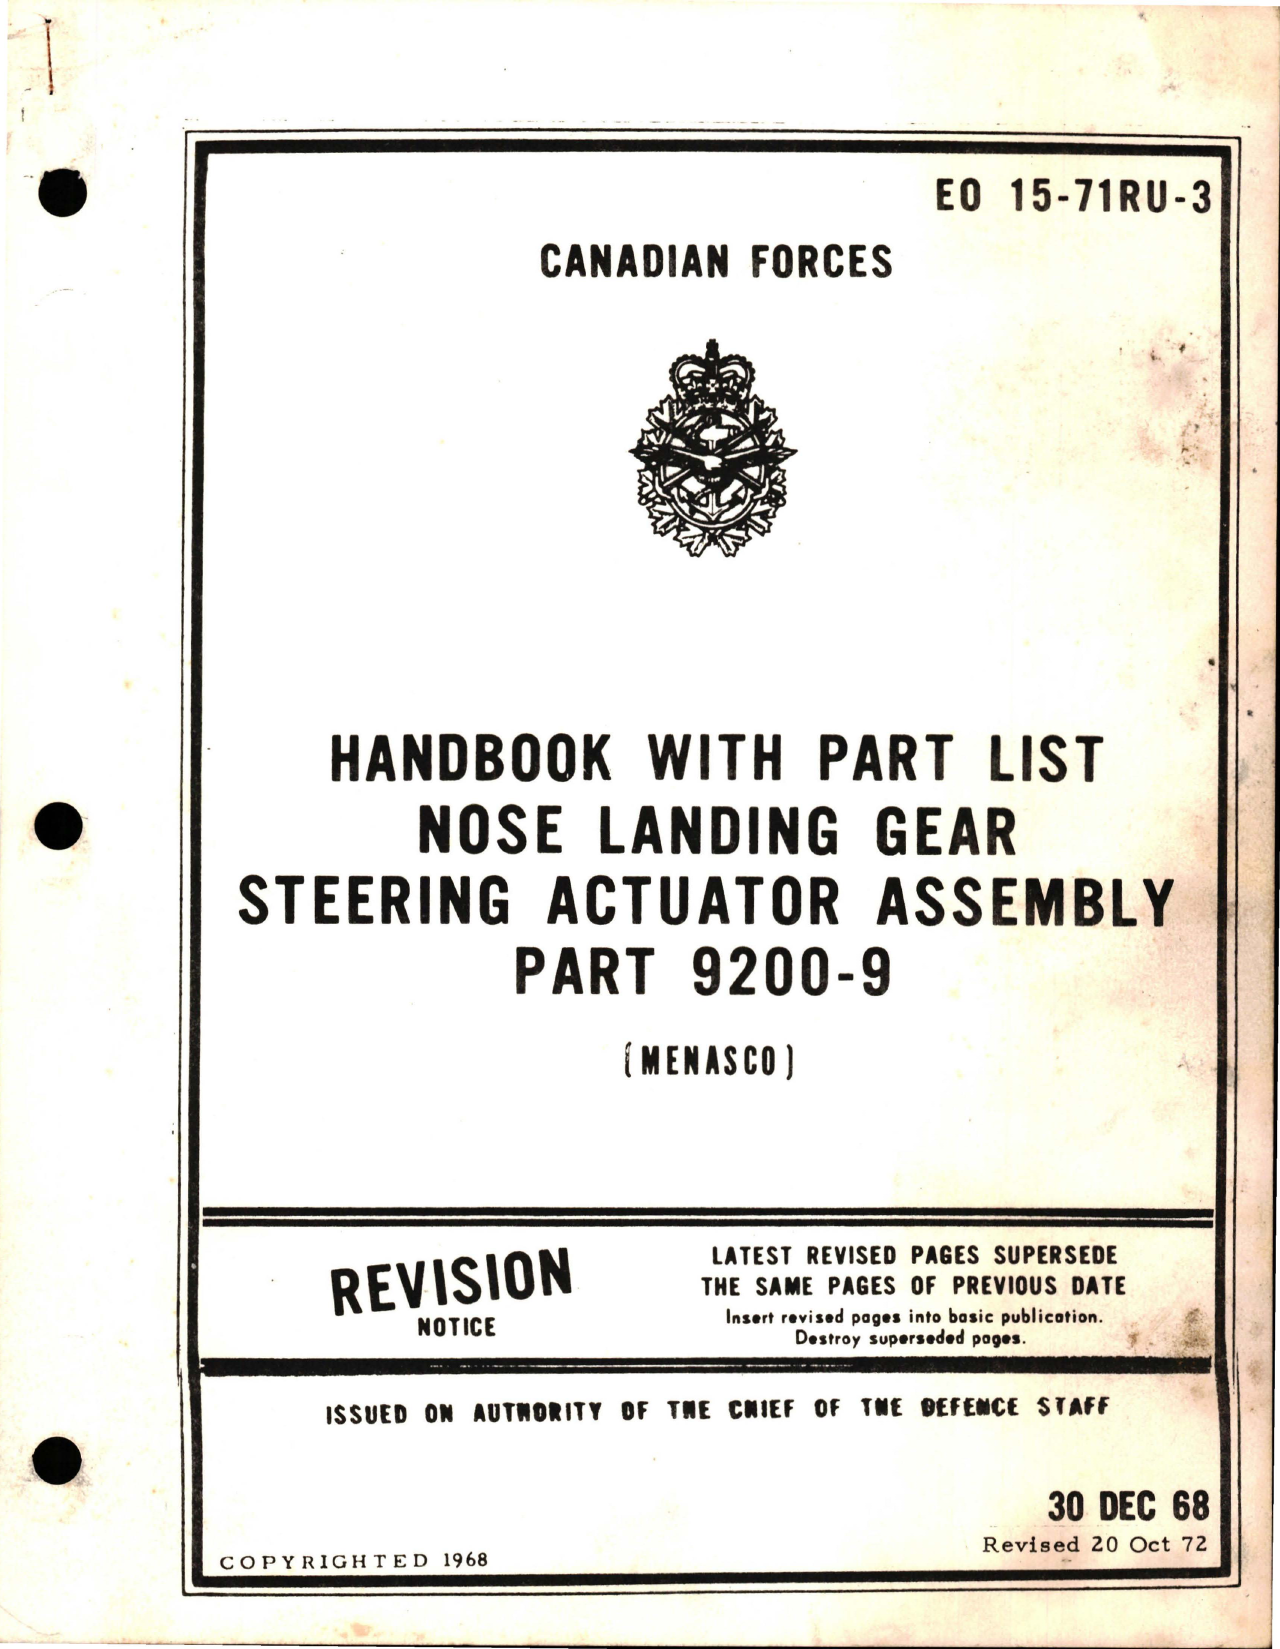 Sample page 1 from AirCorps Library document: Handbook with Part List for Nose Landing Gear Steering Actuator Assembly - Part 9200-9